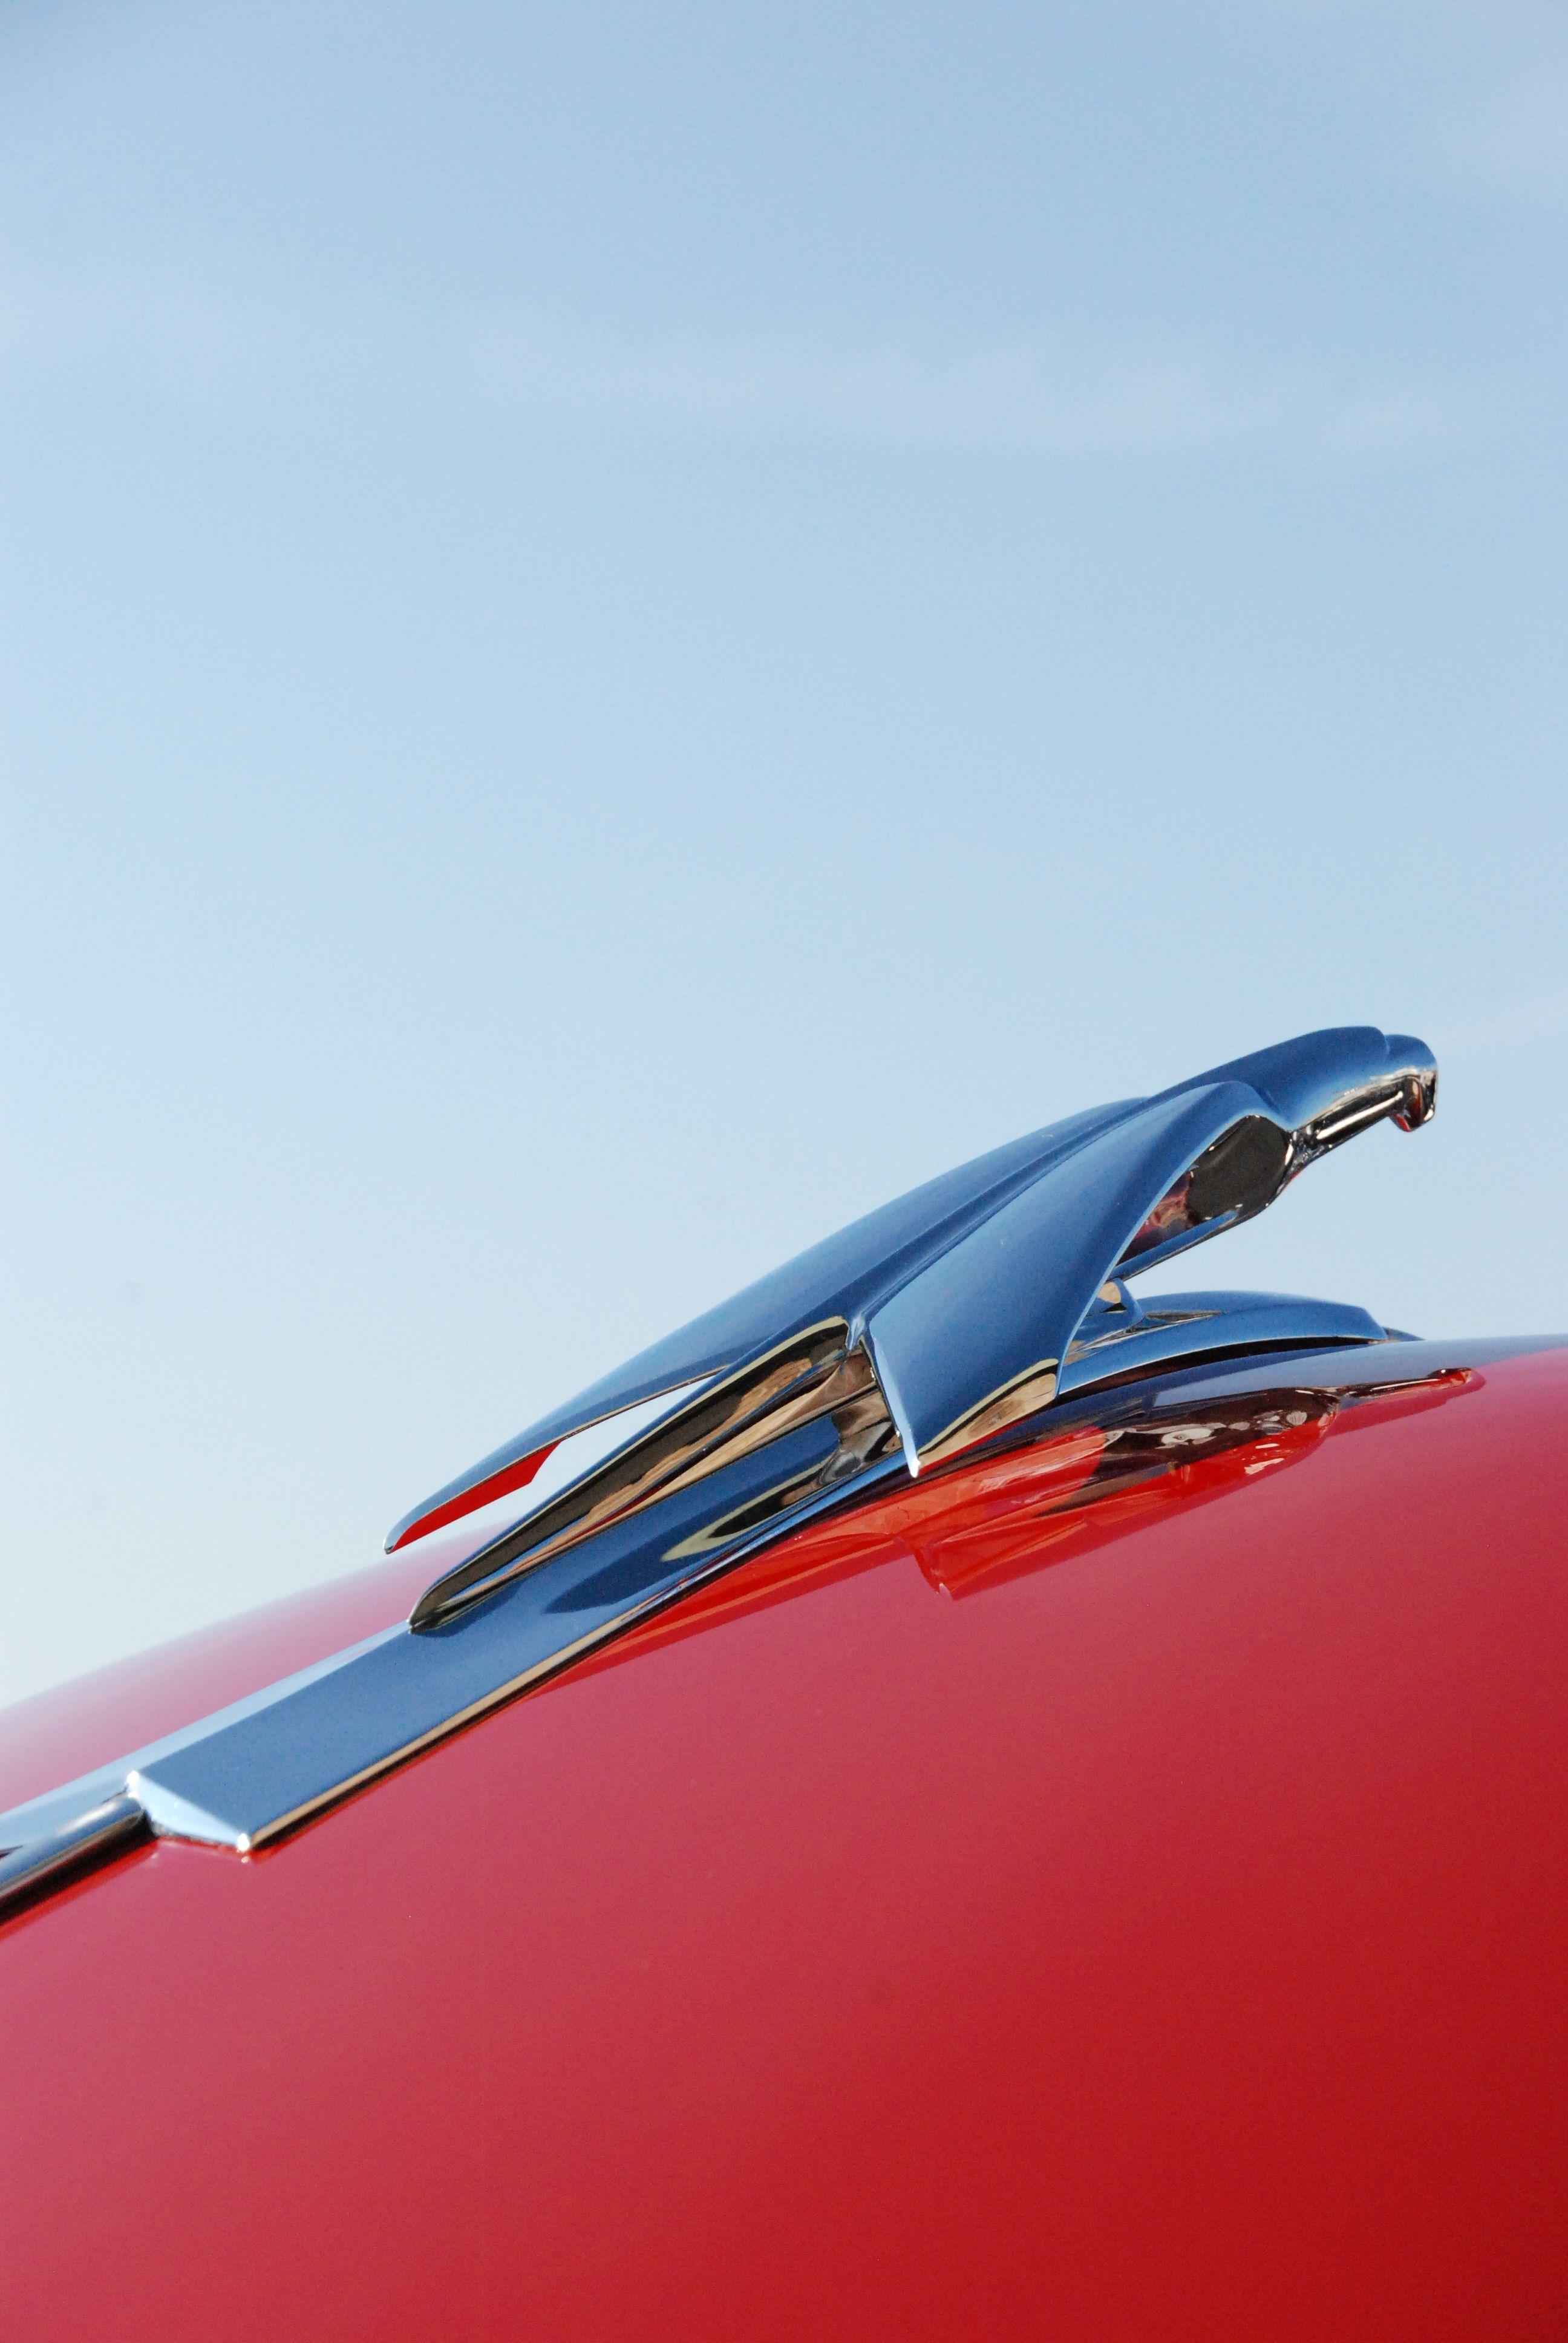 Old Buick Tail Lights Logo - Classic Buick Hood Ornament | KTCo Photography | Hood ornaments ...